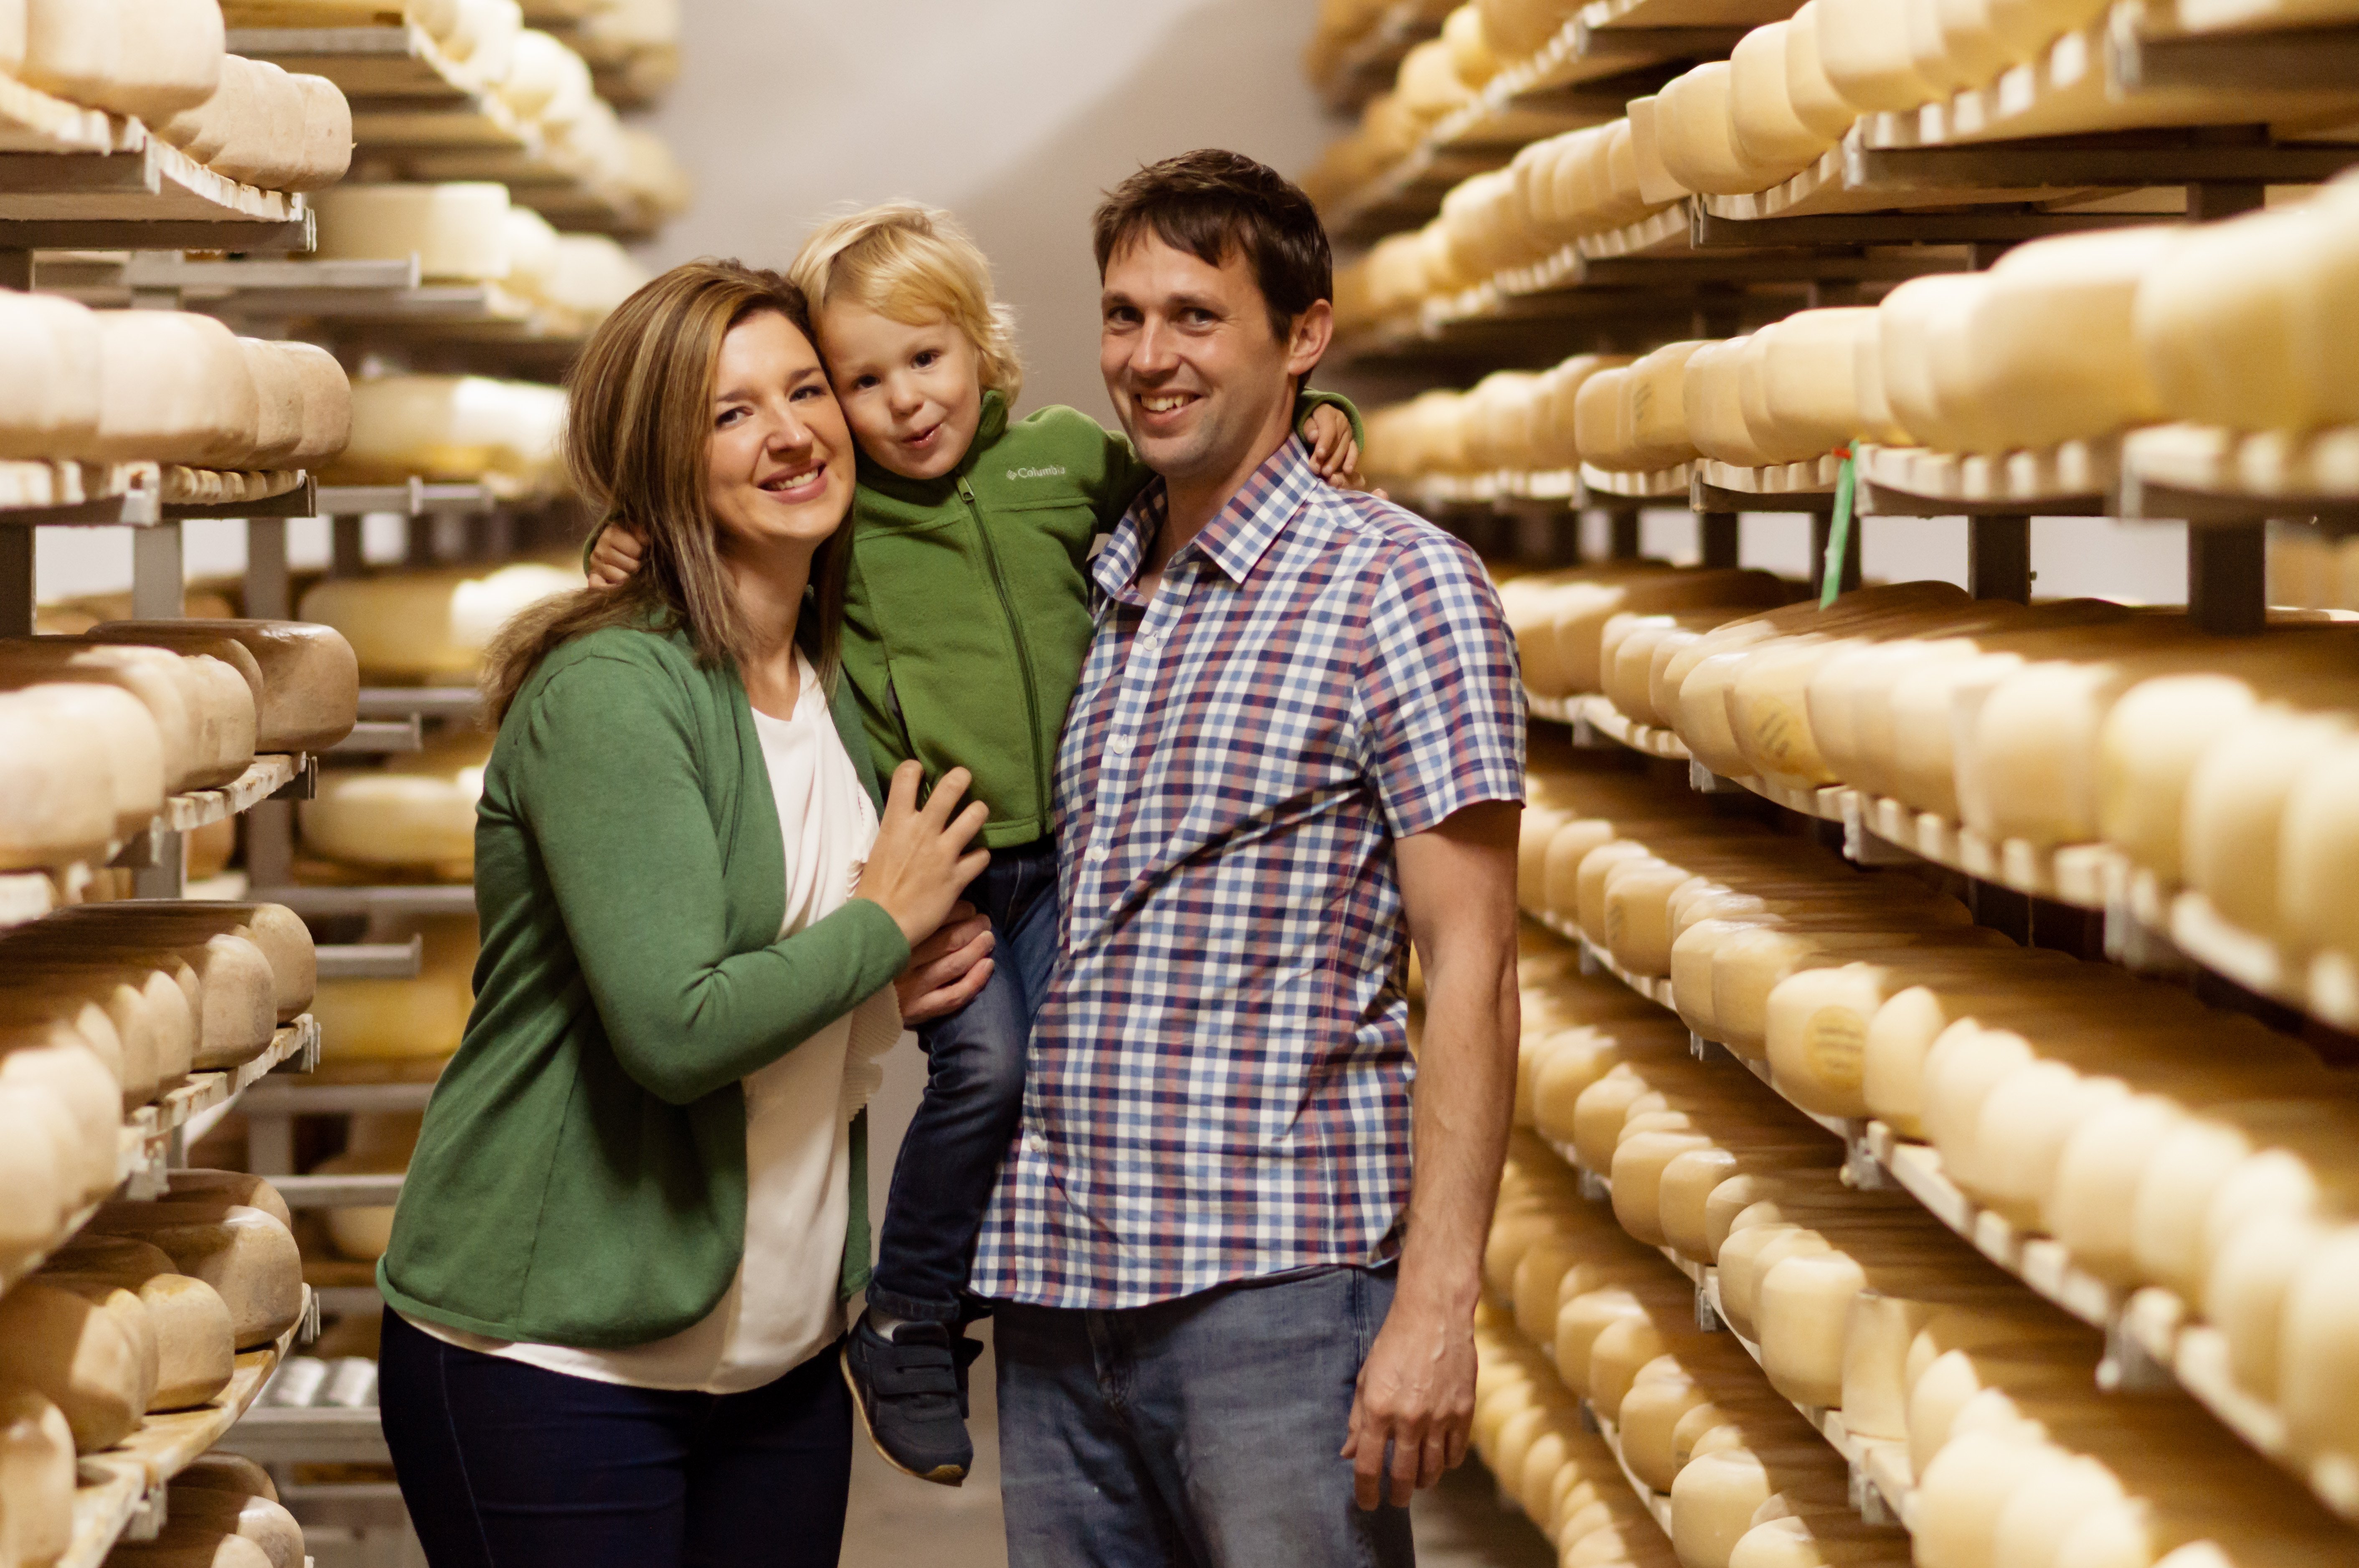 Gunn's Hill Artisan Cheese owners standing in between a row of cheese